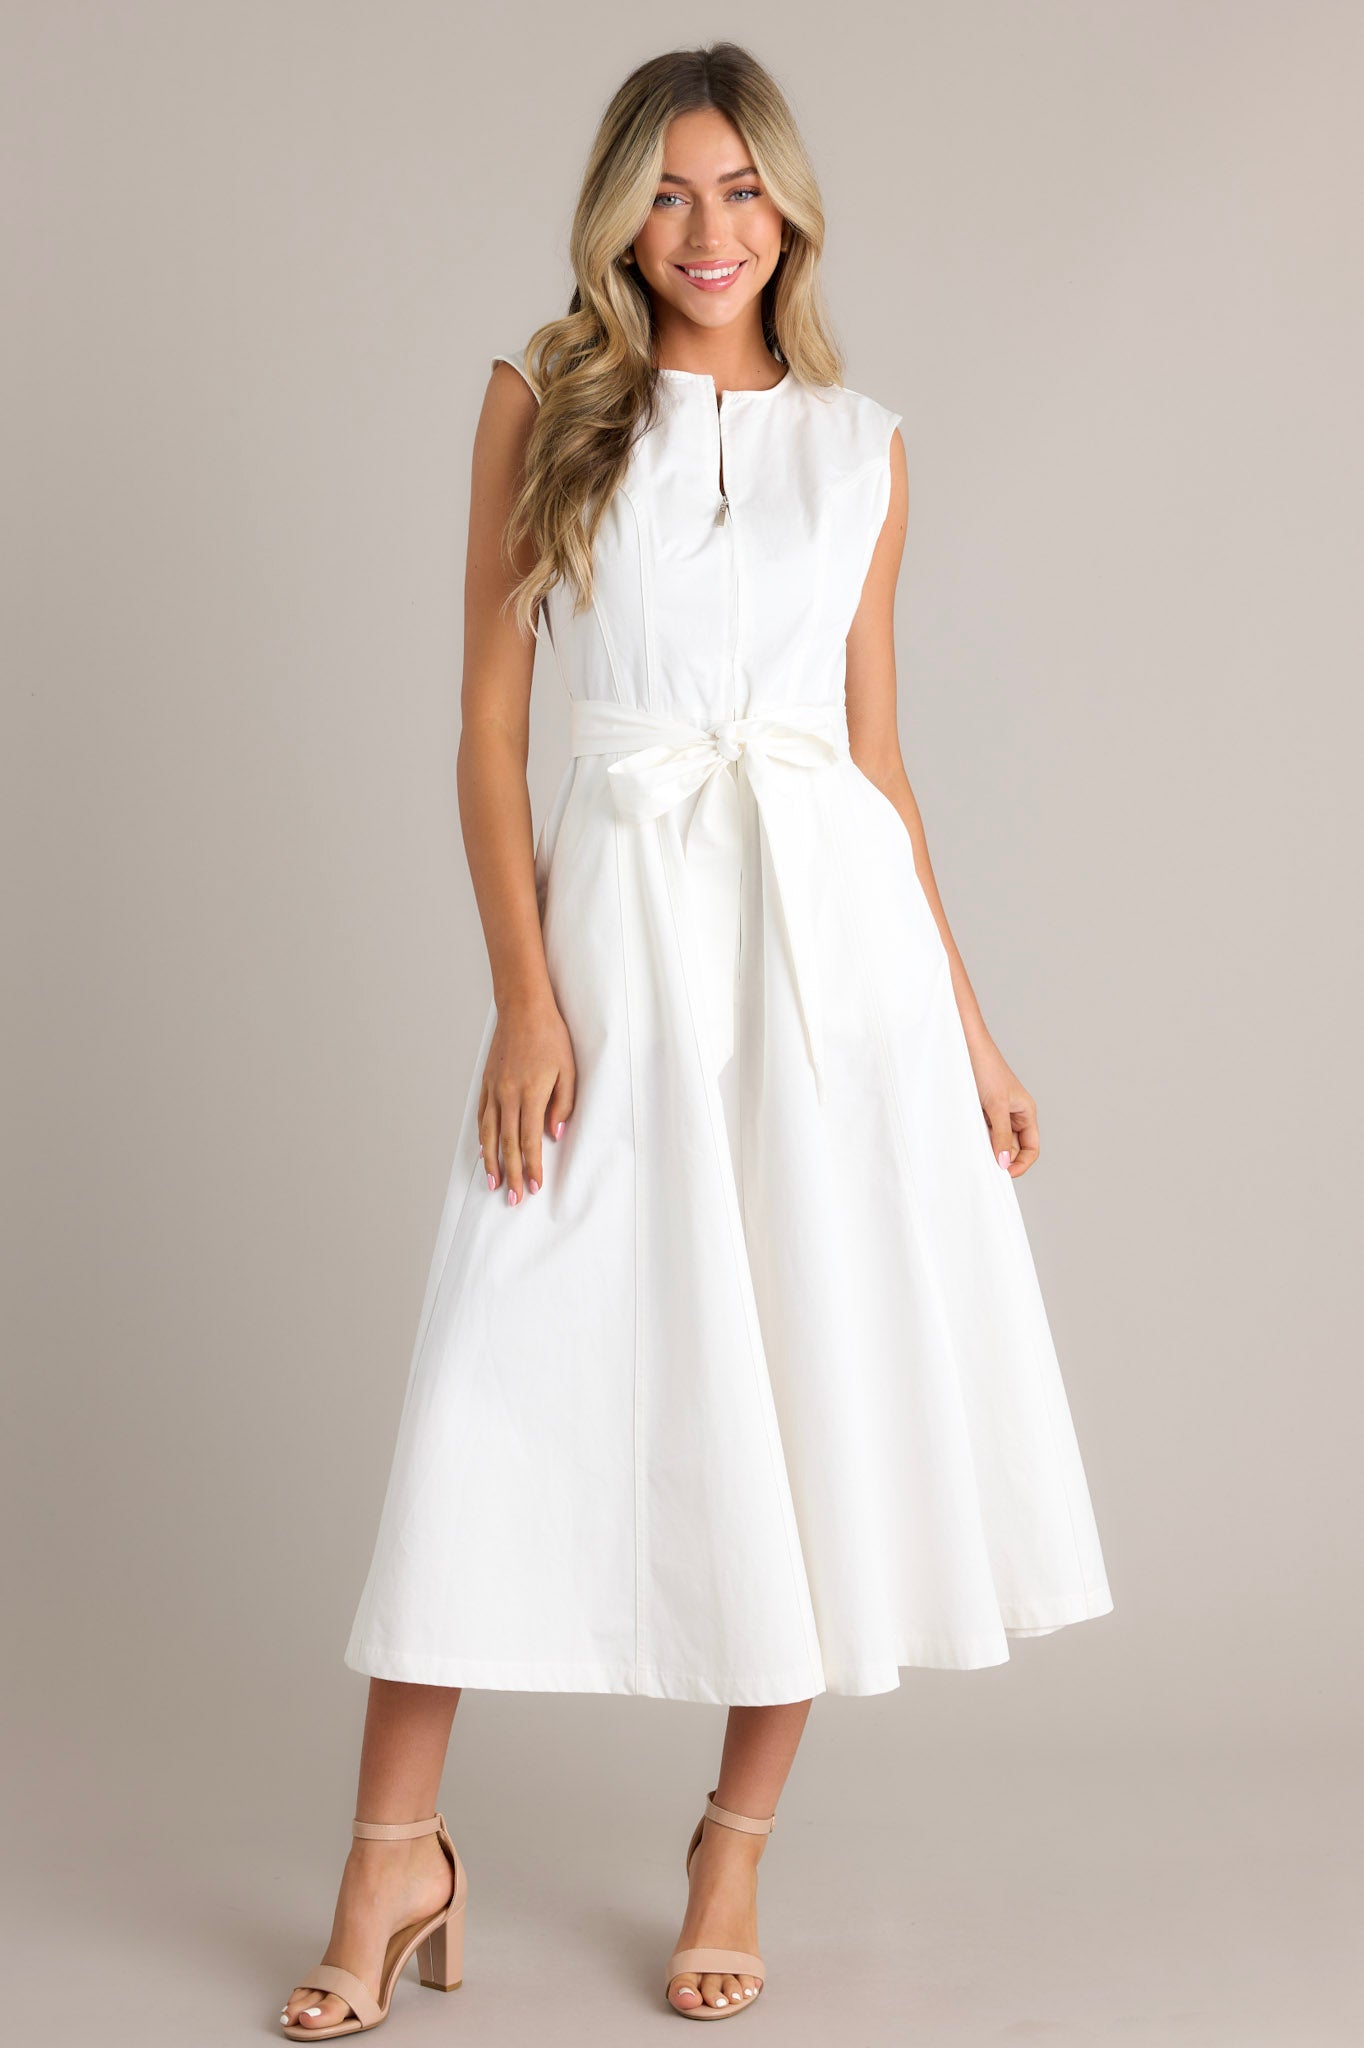 Sleeveless white dress with a flared skirt, front zipper closure, and a bow detail at the waist.